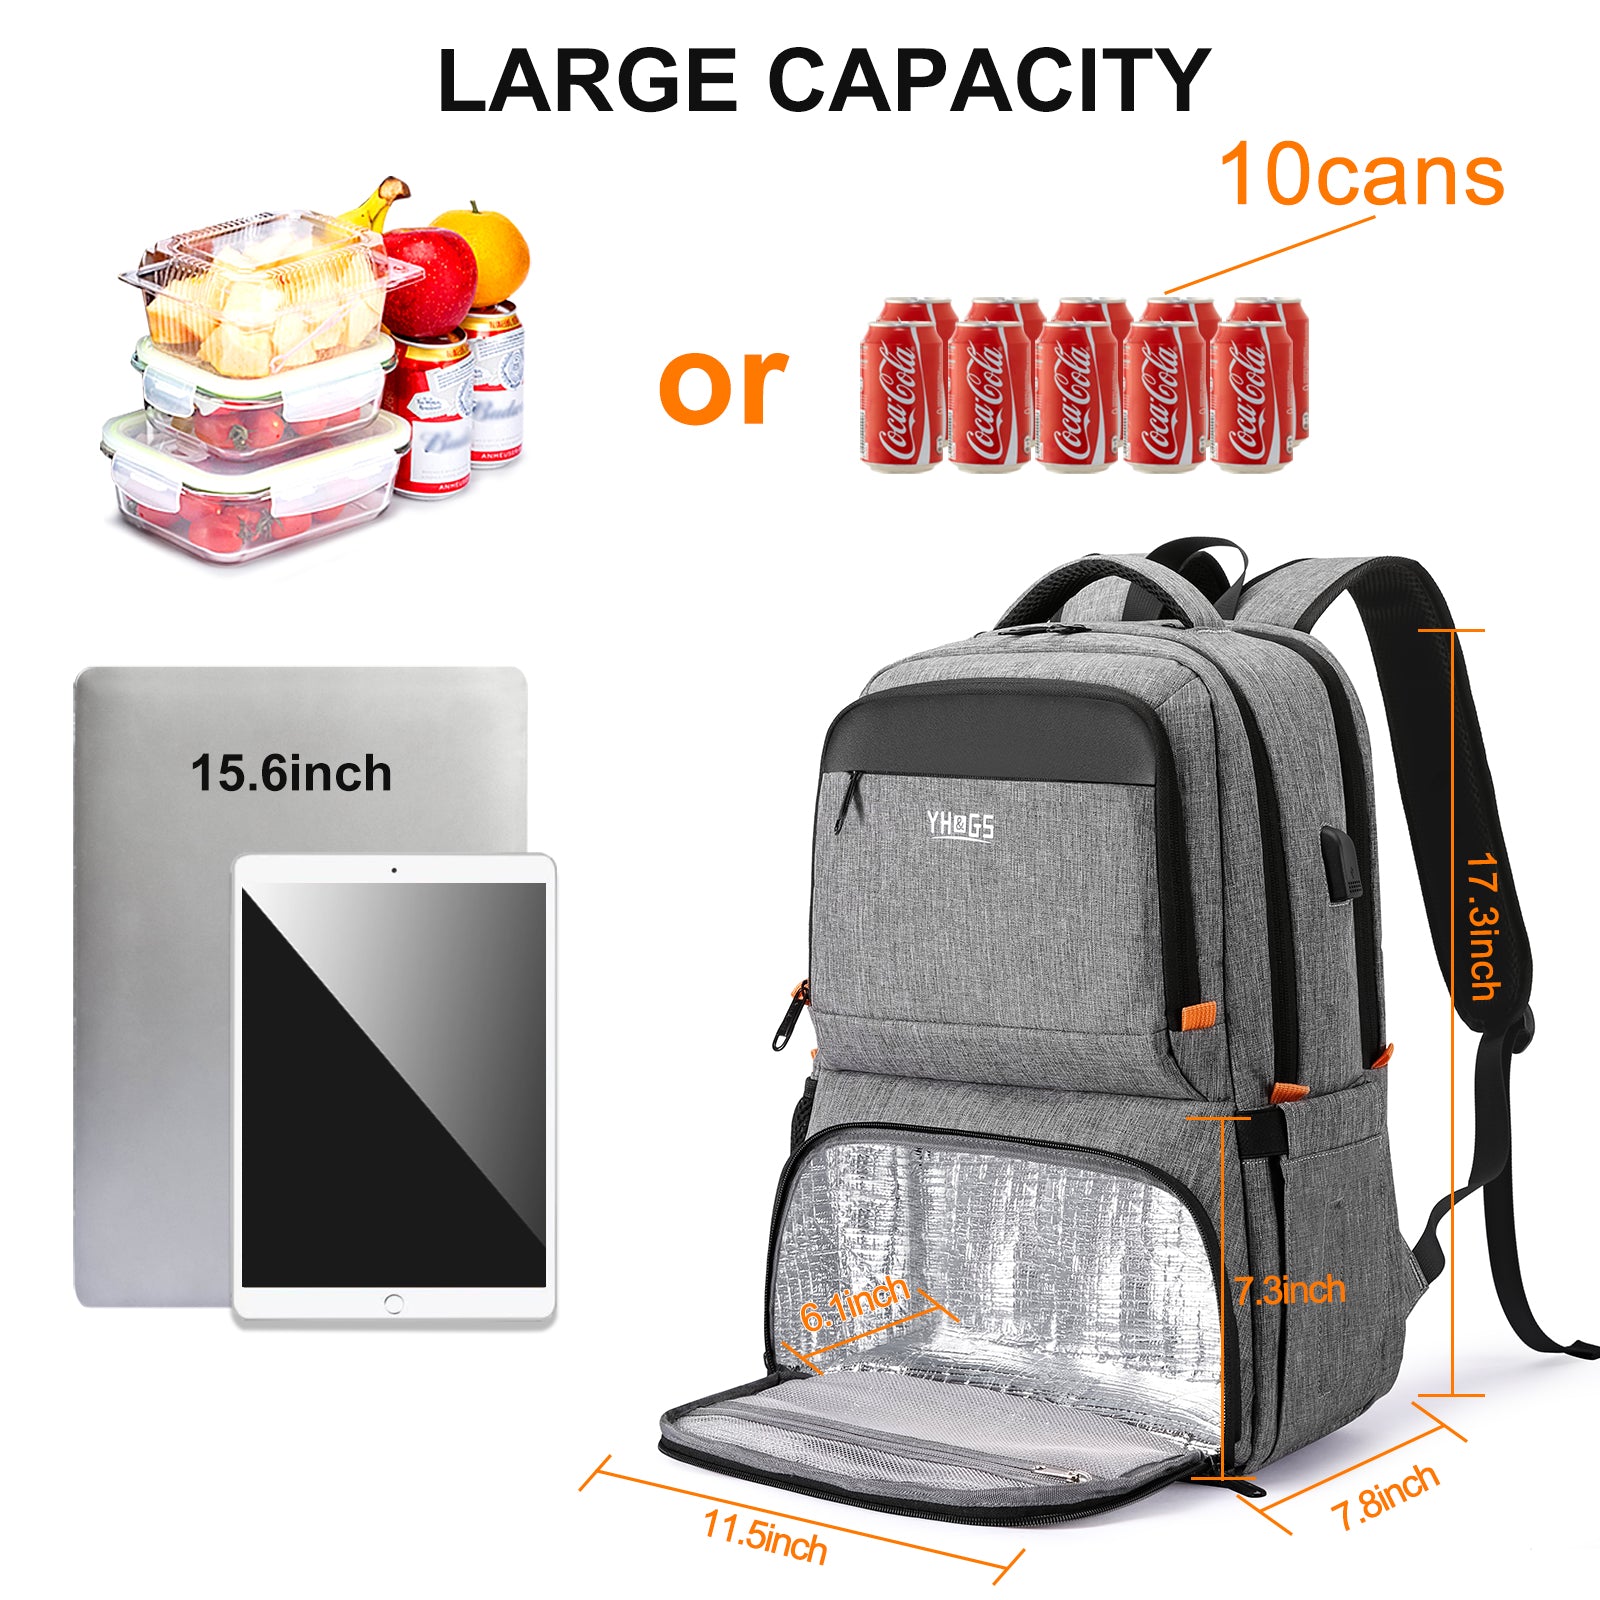 JUMBEAR 15L Leakproof Reusable Insulated Cooler Lunch Bag Office Work Picnic Hiking Beach Lunch Box Organizer with Adjustable